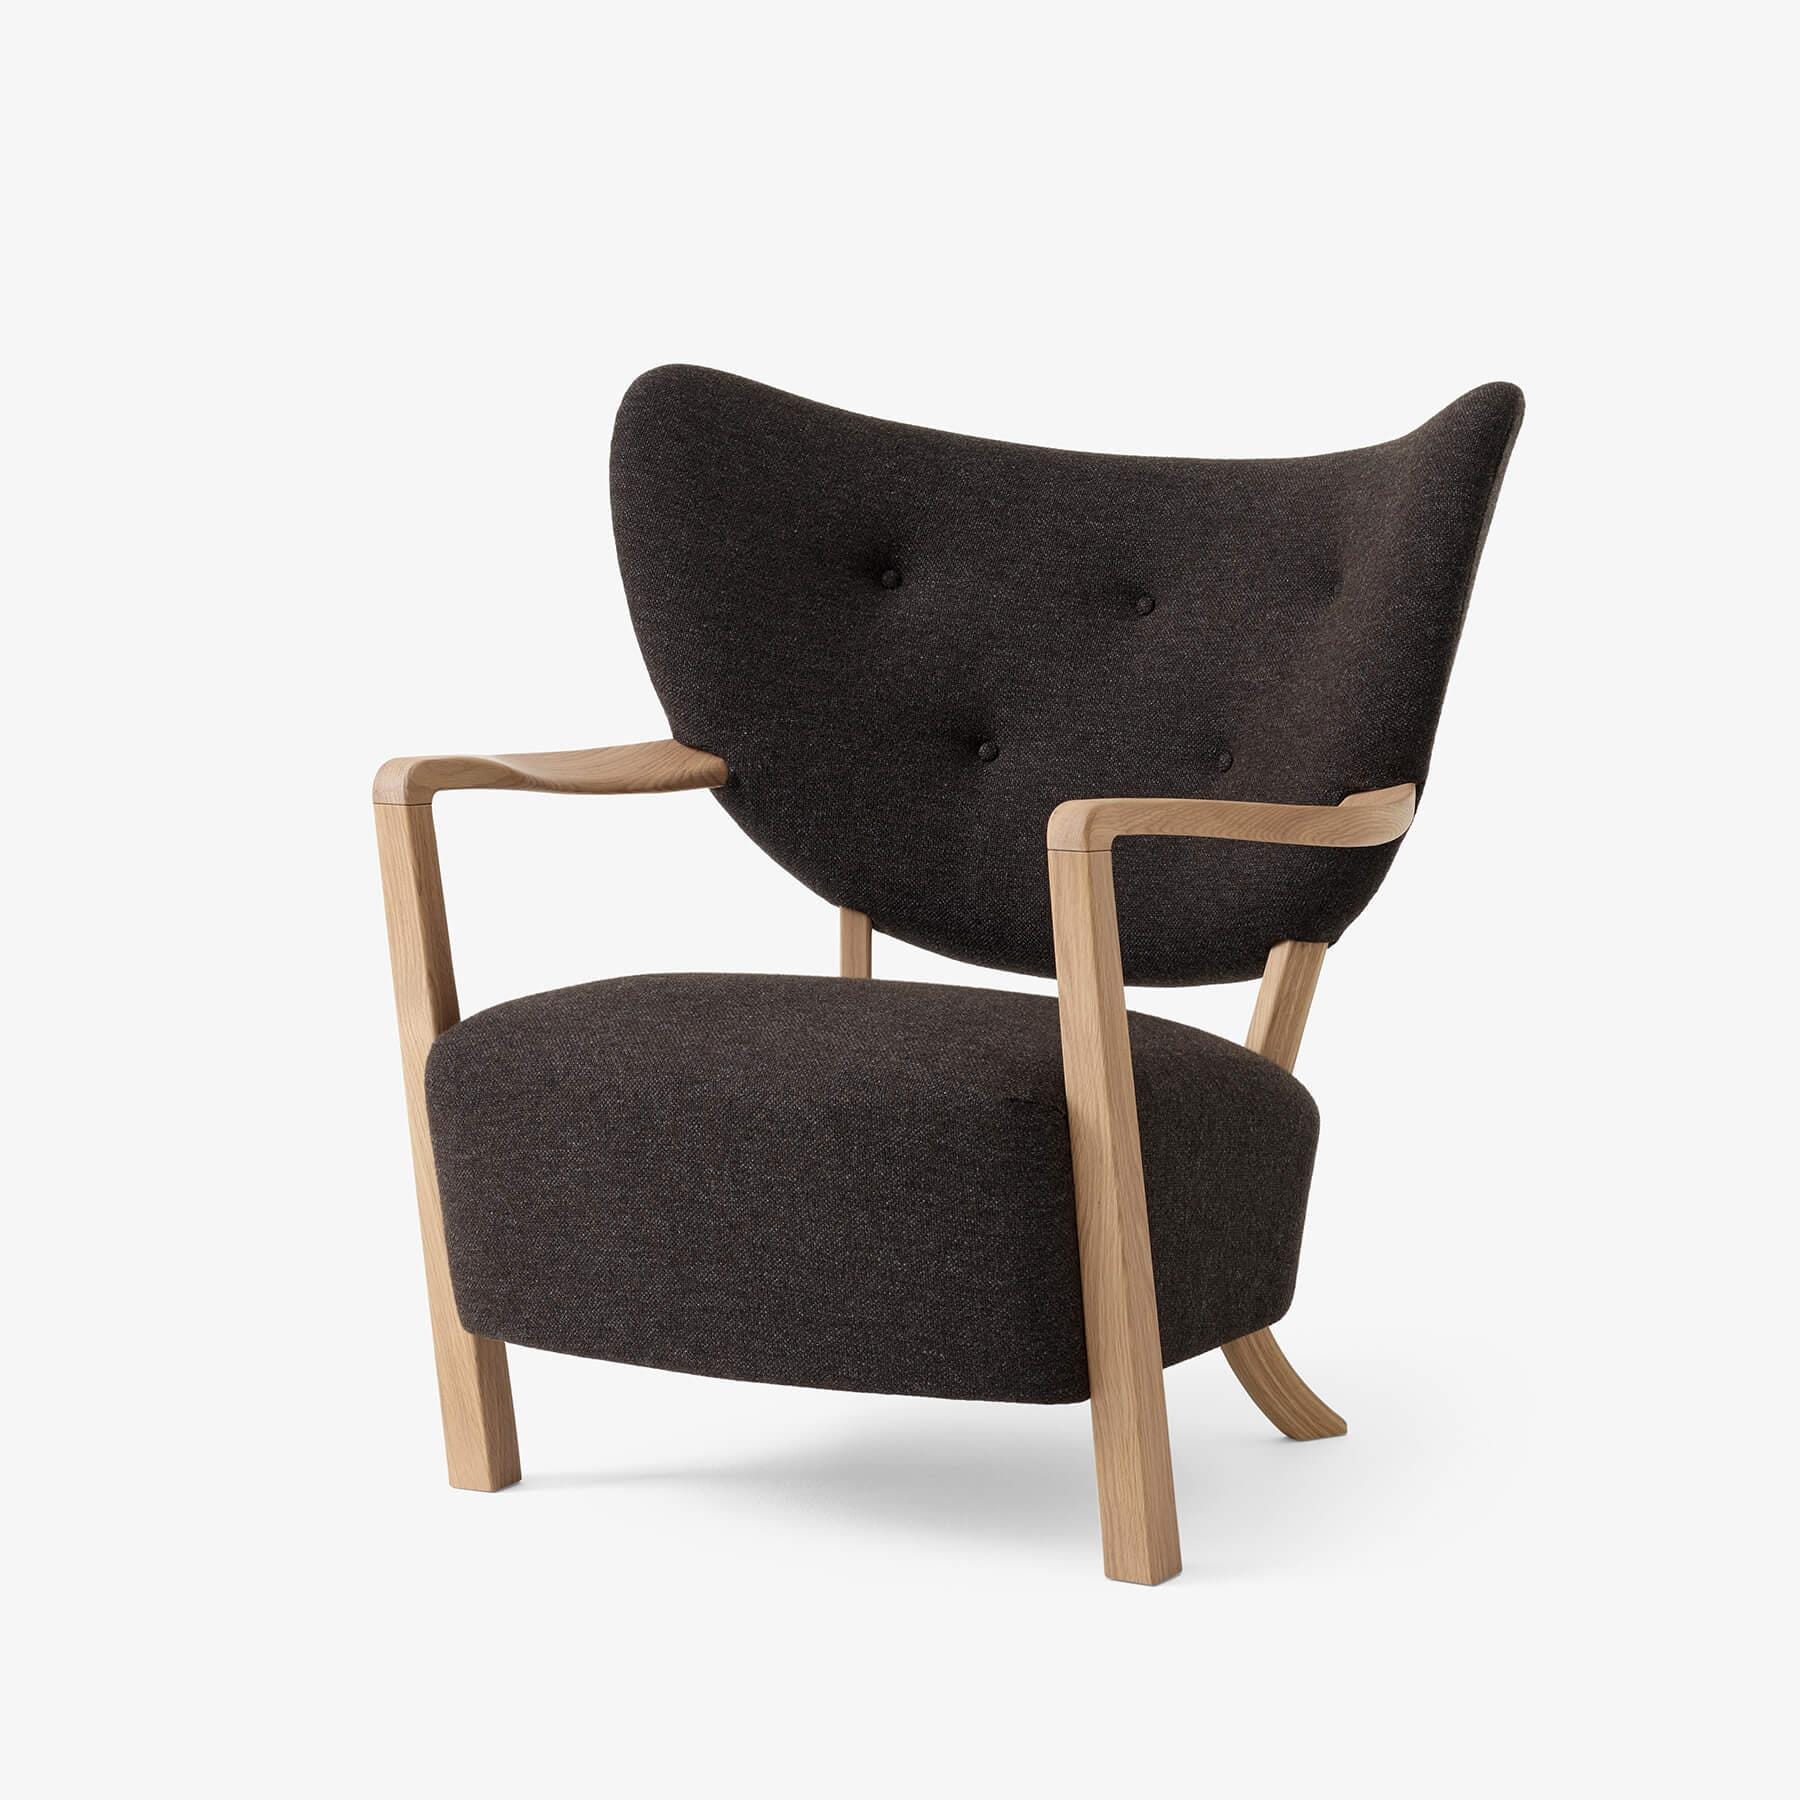 Tradition Wulff Adt2 Lounge Chair Hallingdal 376 Oiled Oak No Ottoman Black Designer Furniture From Holloways Of Ludlow